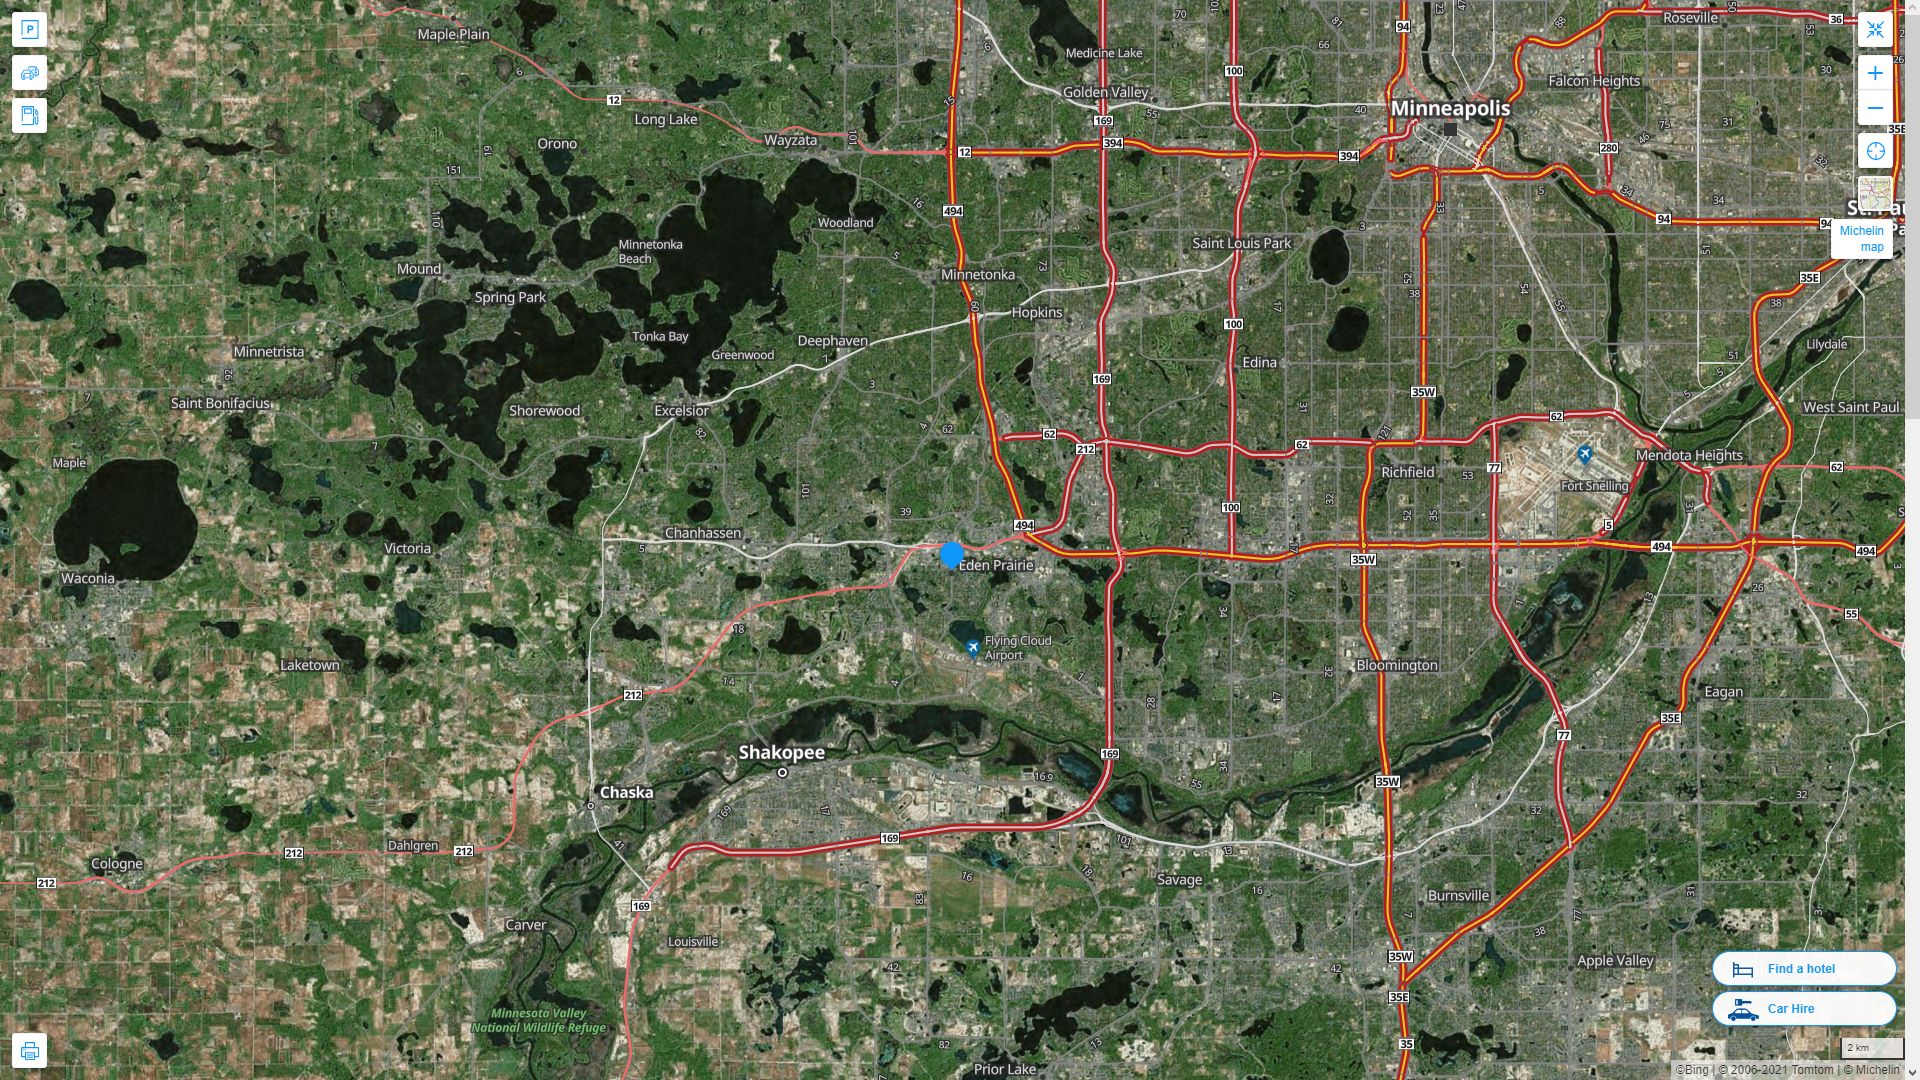 Eden Prairie Minnesota Highway and Road Map with Satellite View